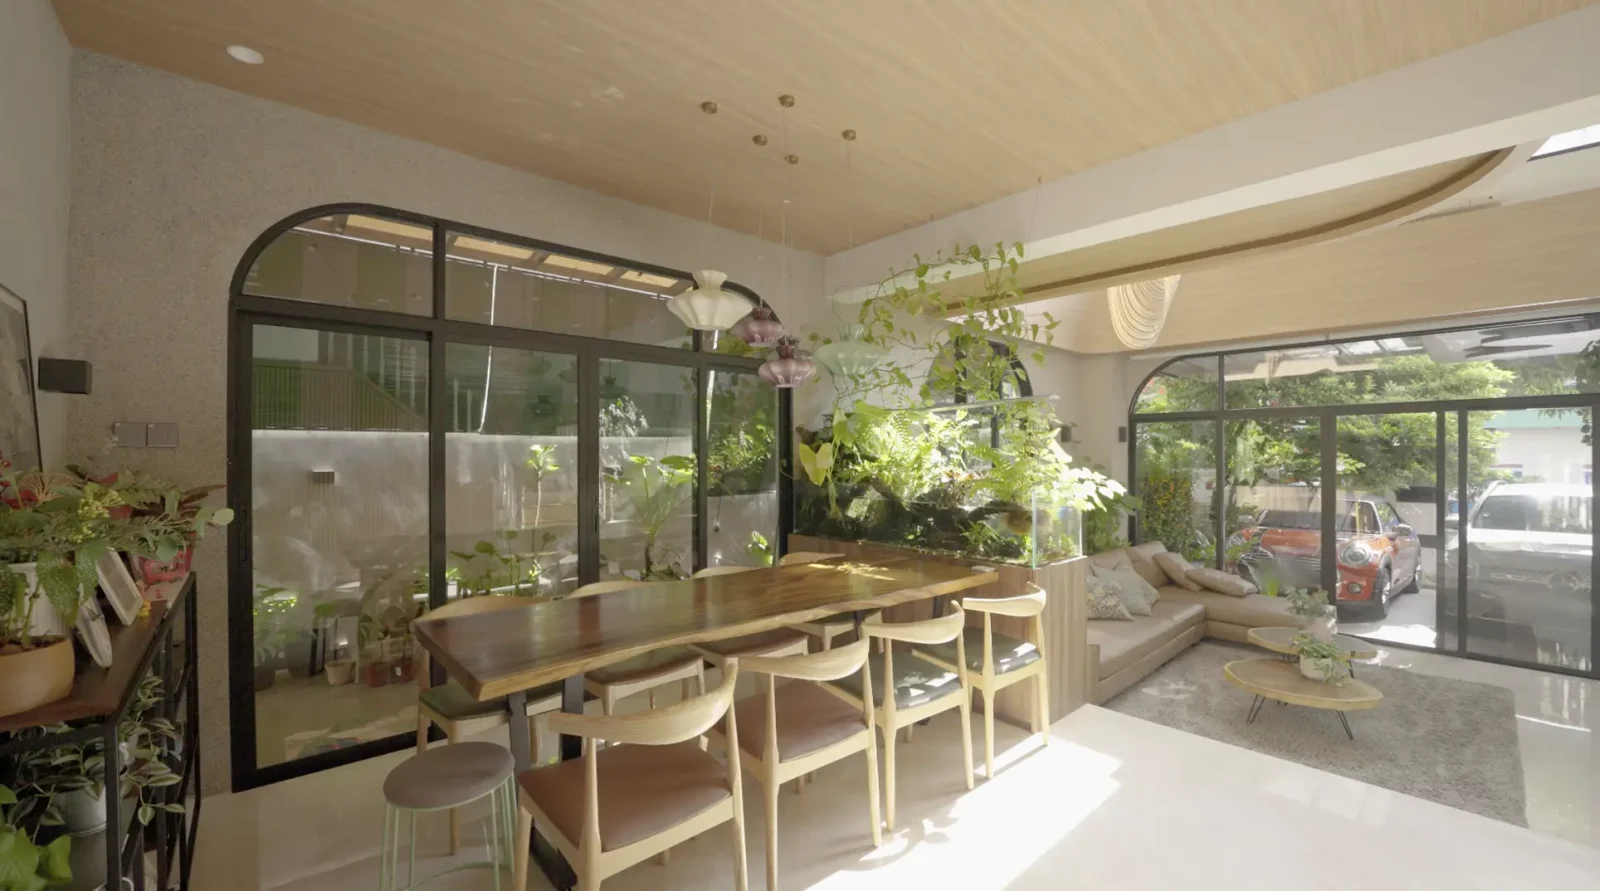 A Designers Journey To A Secret Garden Home For His Family 7